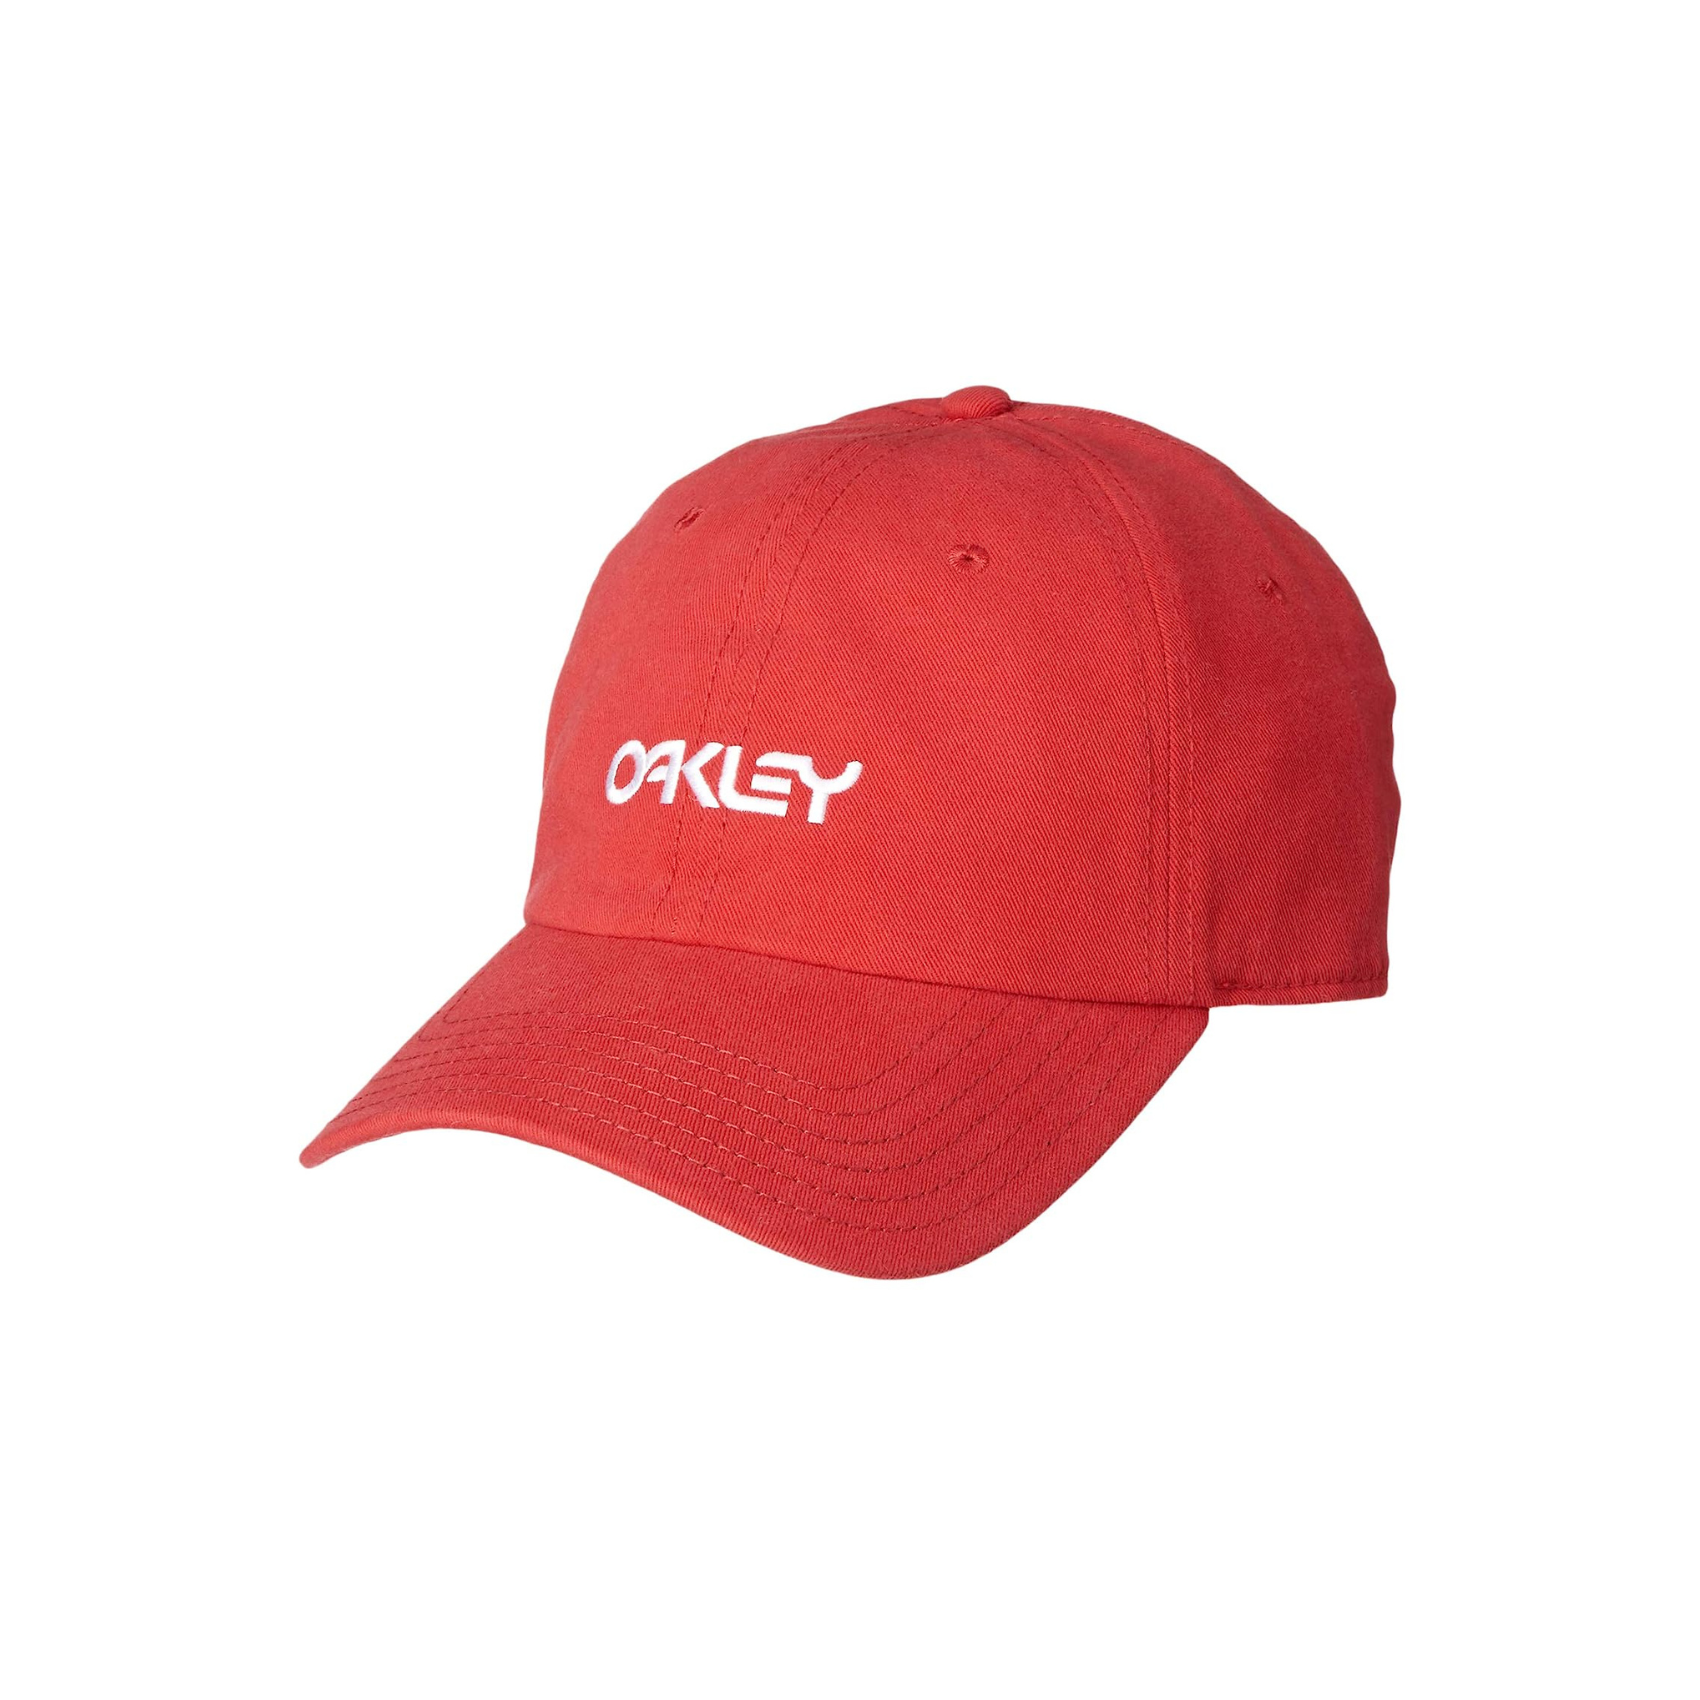 6 Panel Washed Cotton Hat - Red